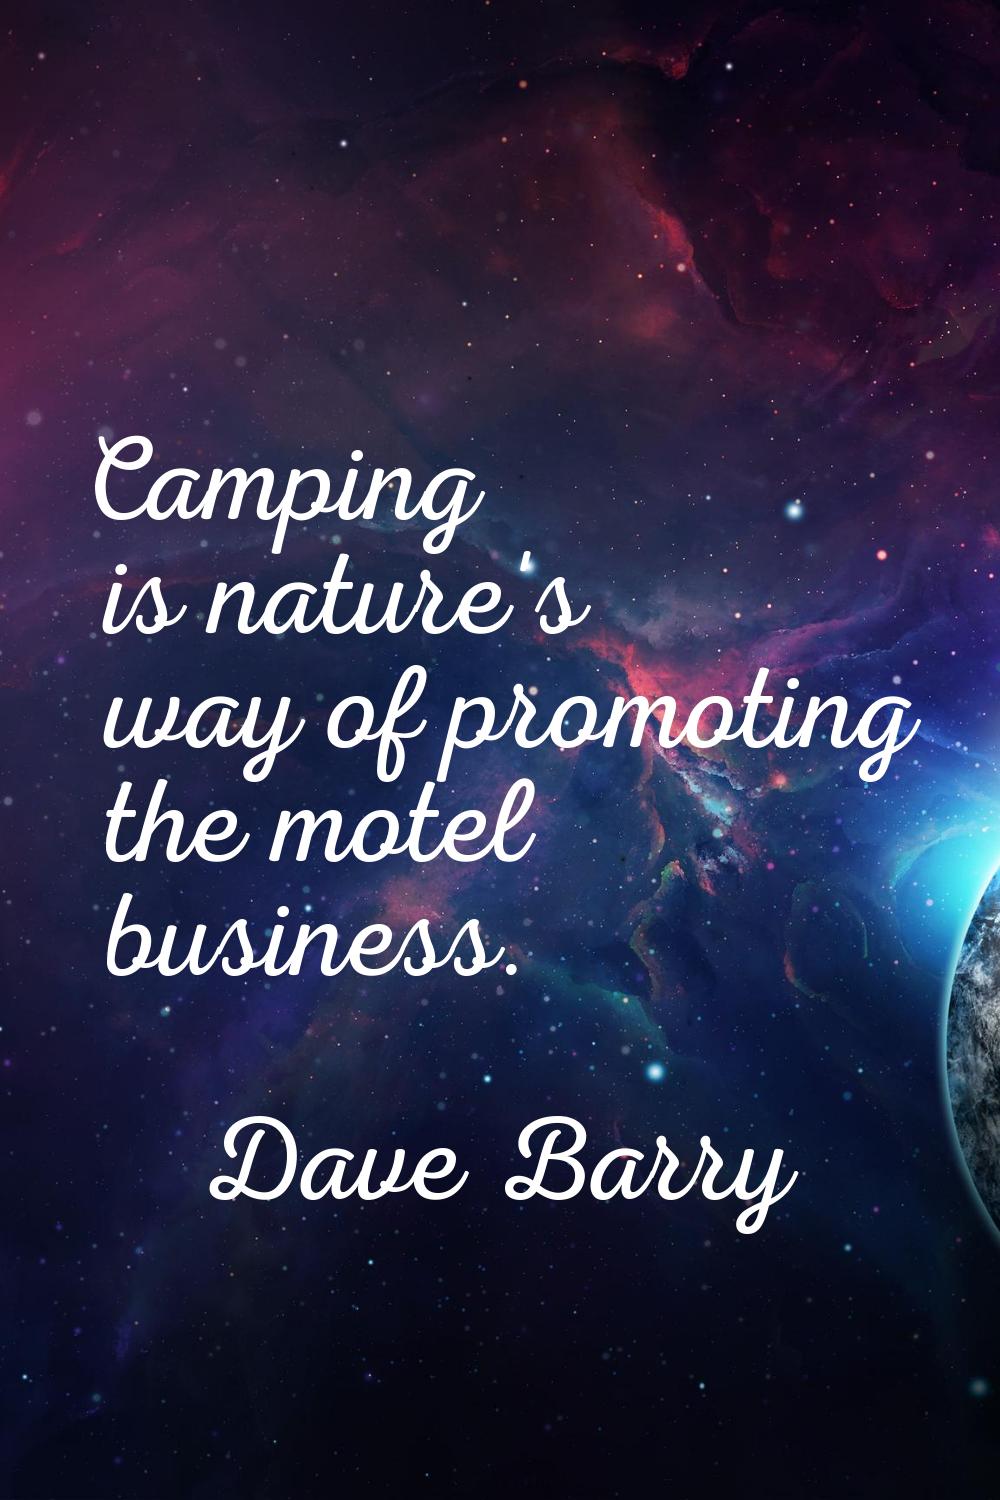 Camping is nature's way of promoting the motel business.